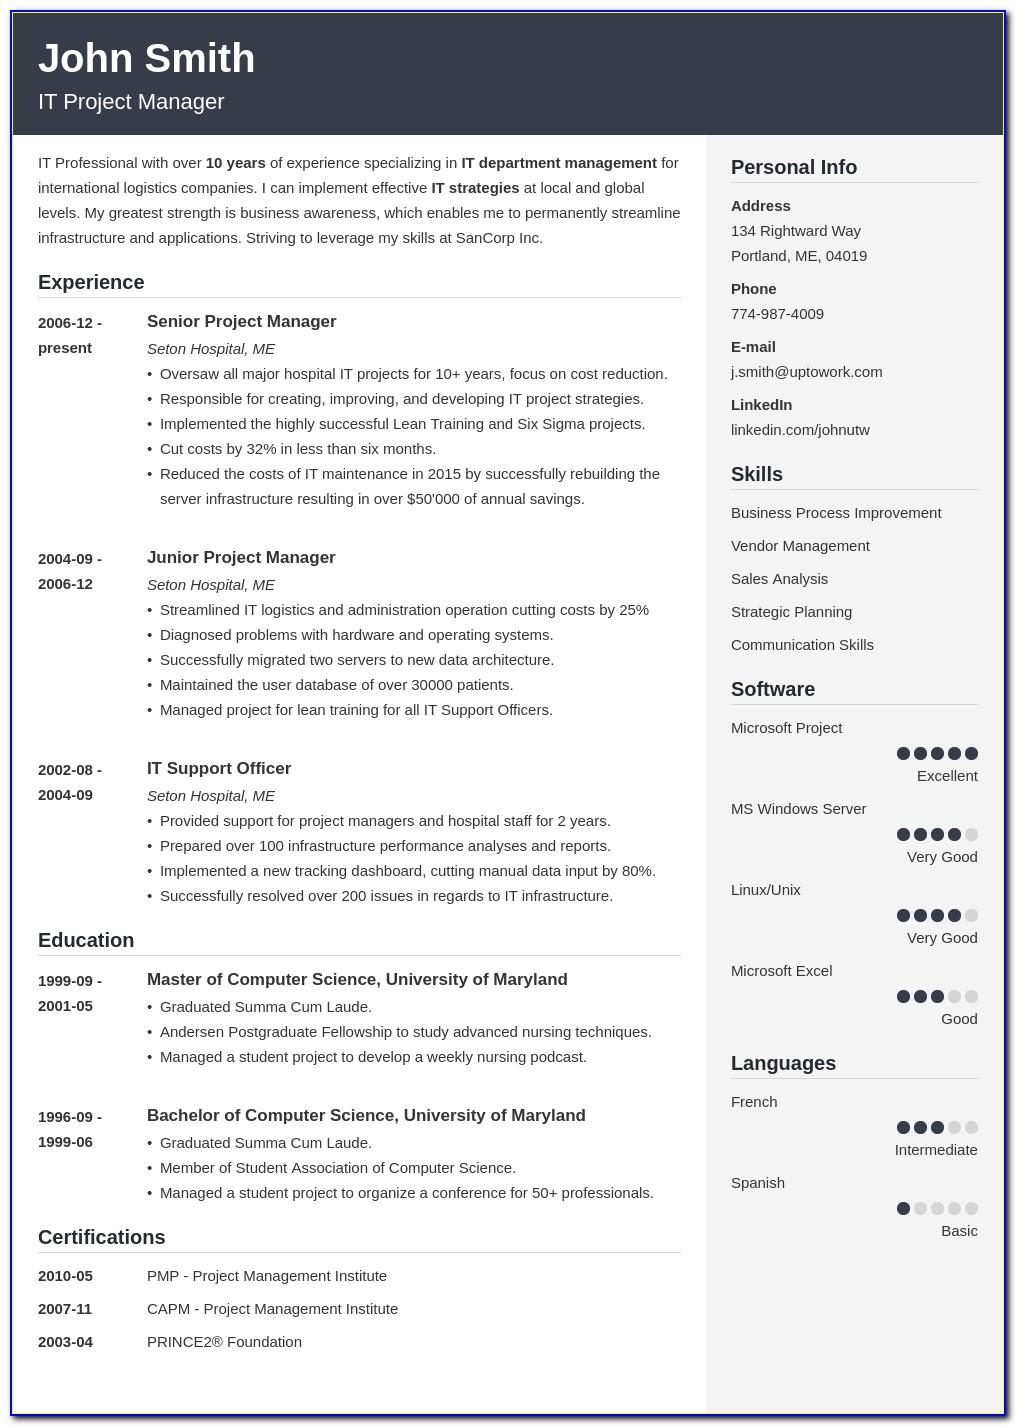 Top Rated Resume Formats